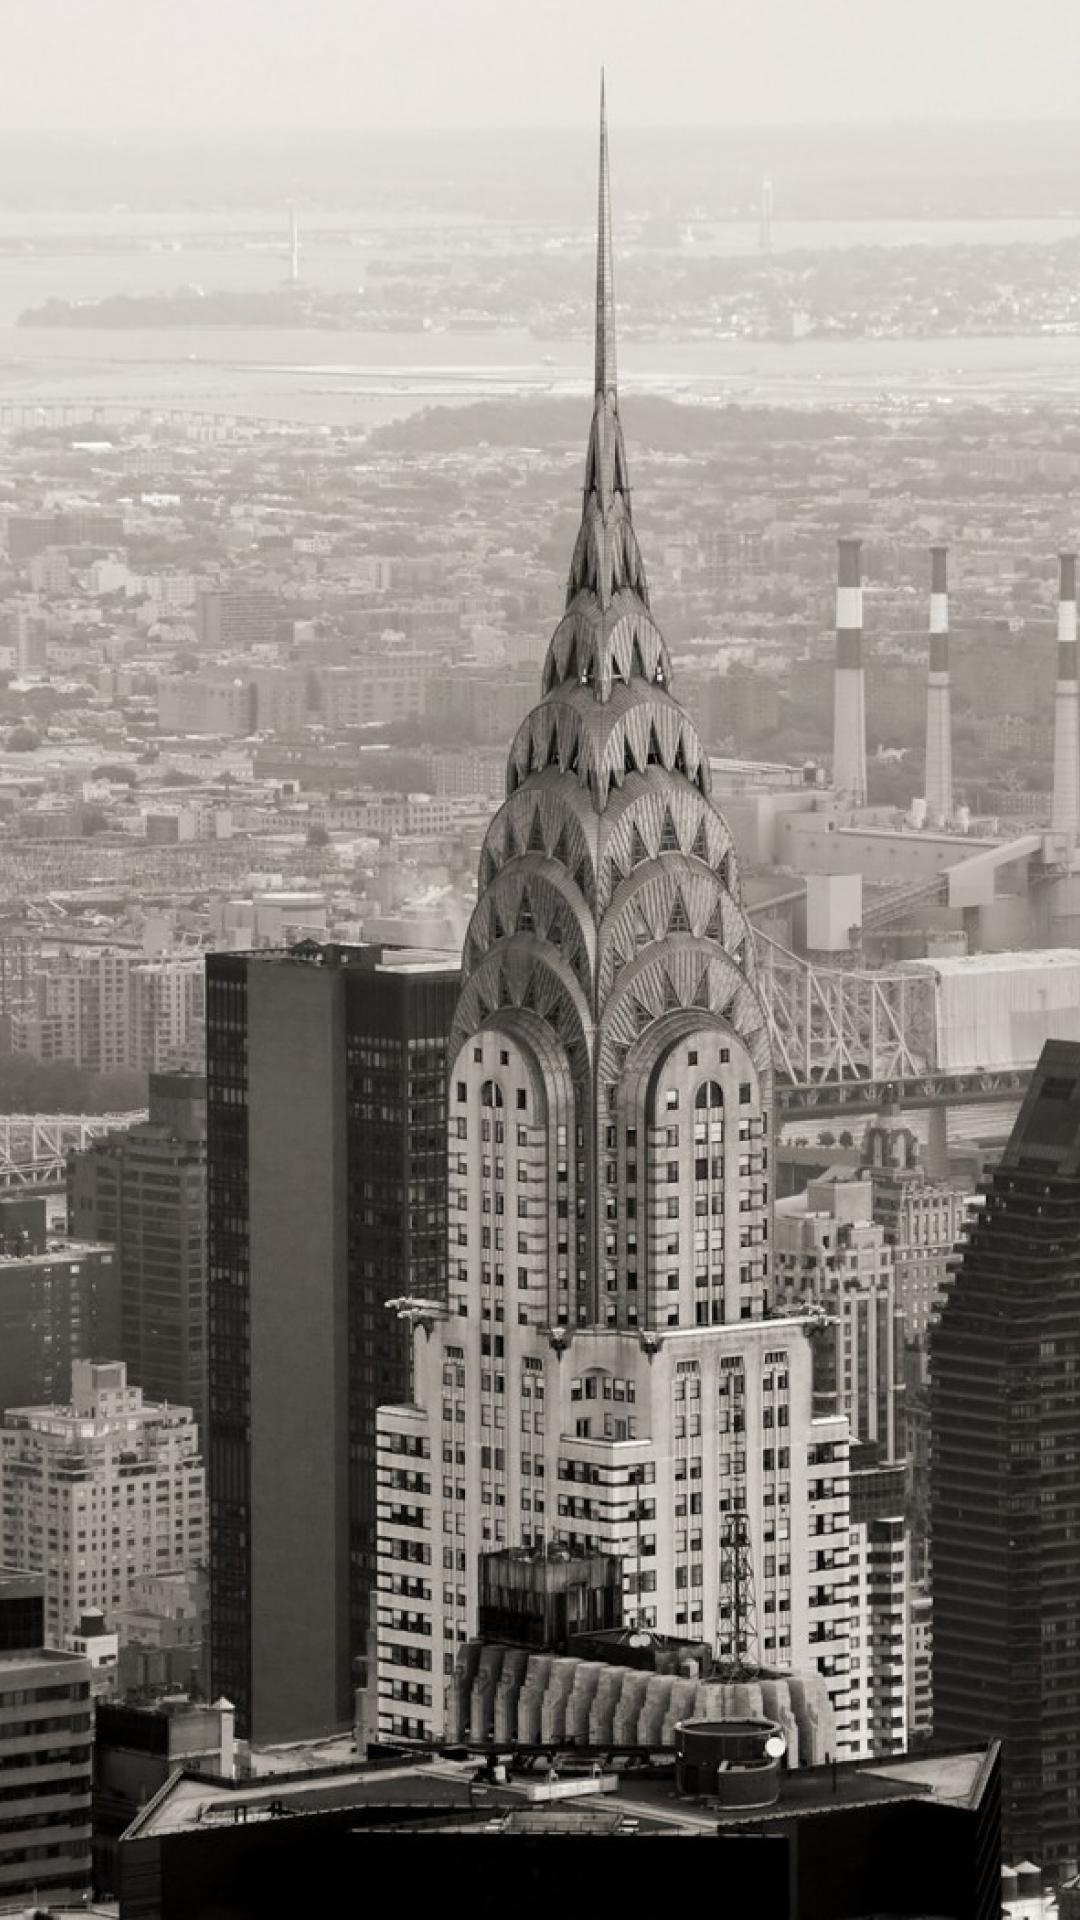 Chrysler Building: An Art Deco skyscraper on the East Side of Manhattan in New York City. 1080x1920 Full HD Background.